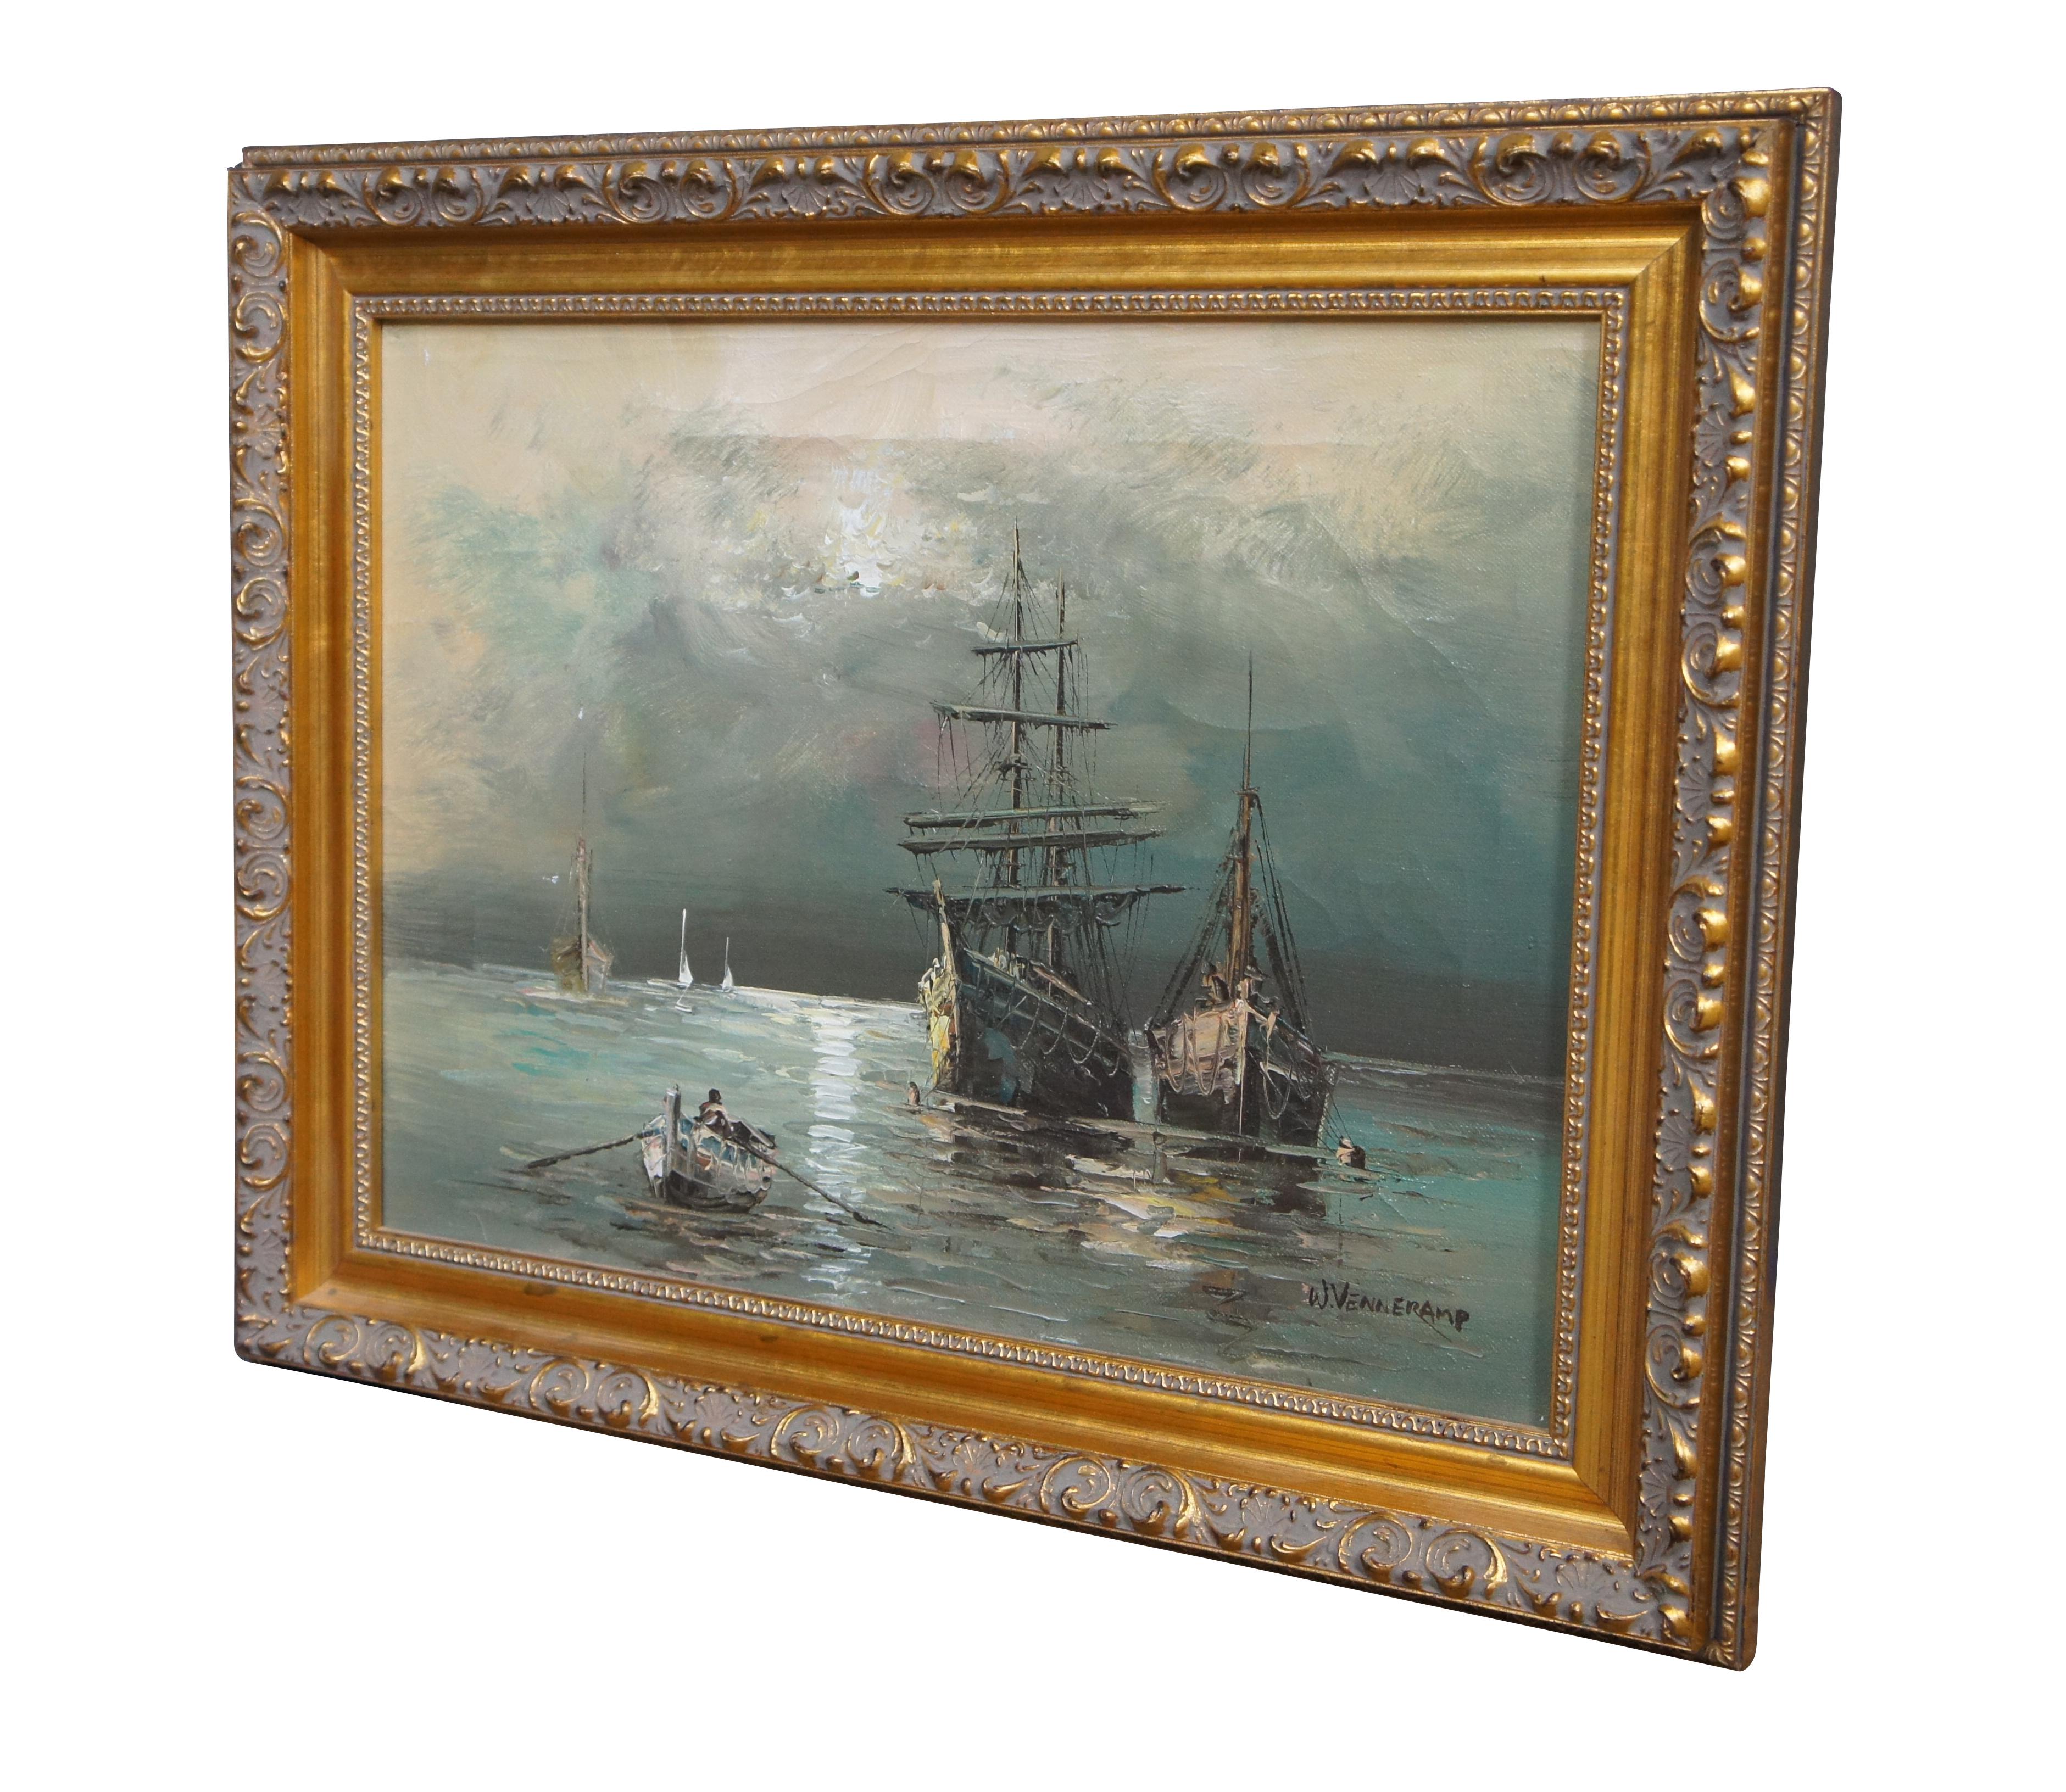 Late 20th century expressionist seascape showing several masted sailing ships and a row boat / dinghy, by W. Venneramp / Vannerkamp.

Measures: 19.75” x 1.25” x 15.75” / Sans Frame - 15.5” x 11.5” (Width x Depth x Height).